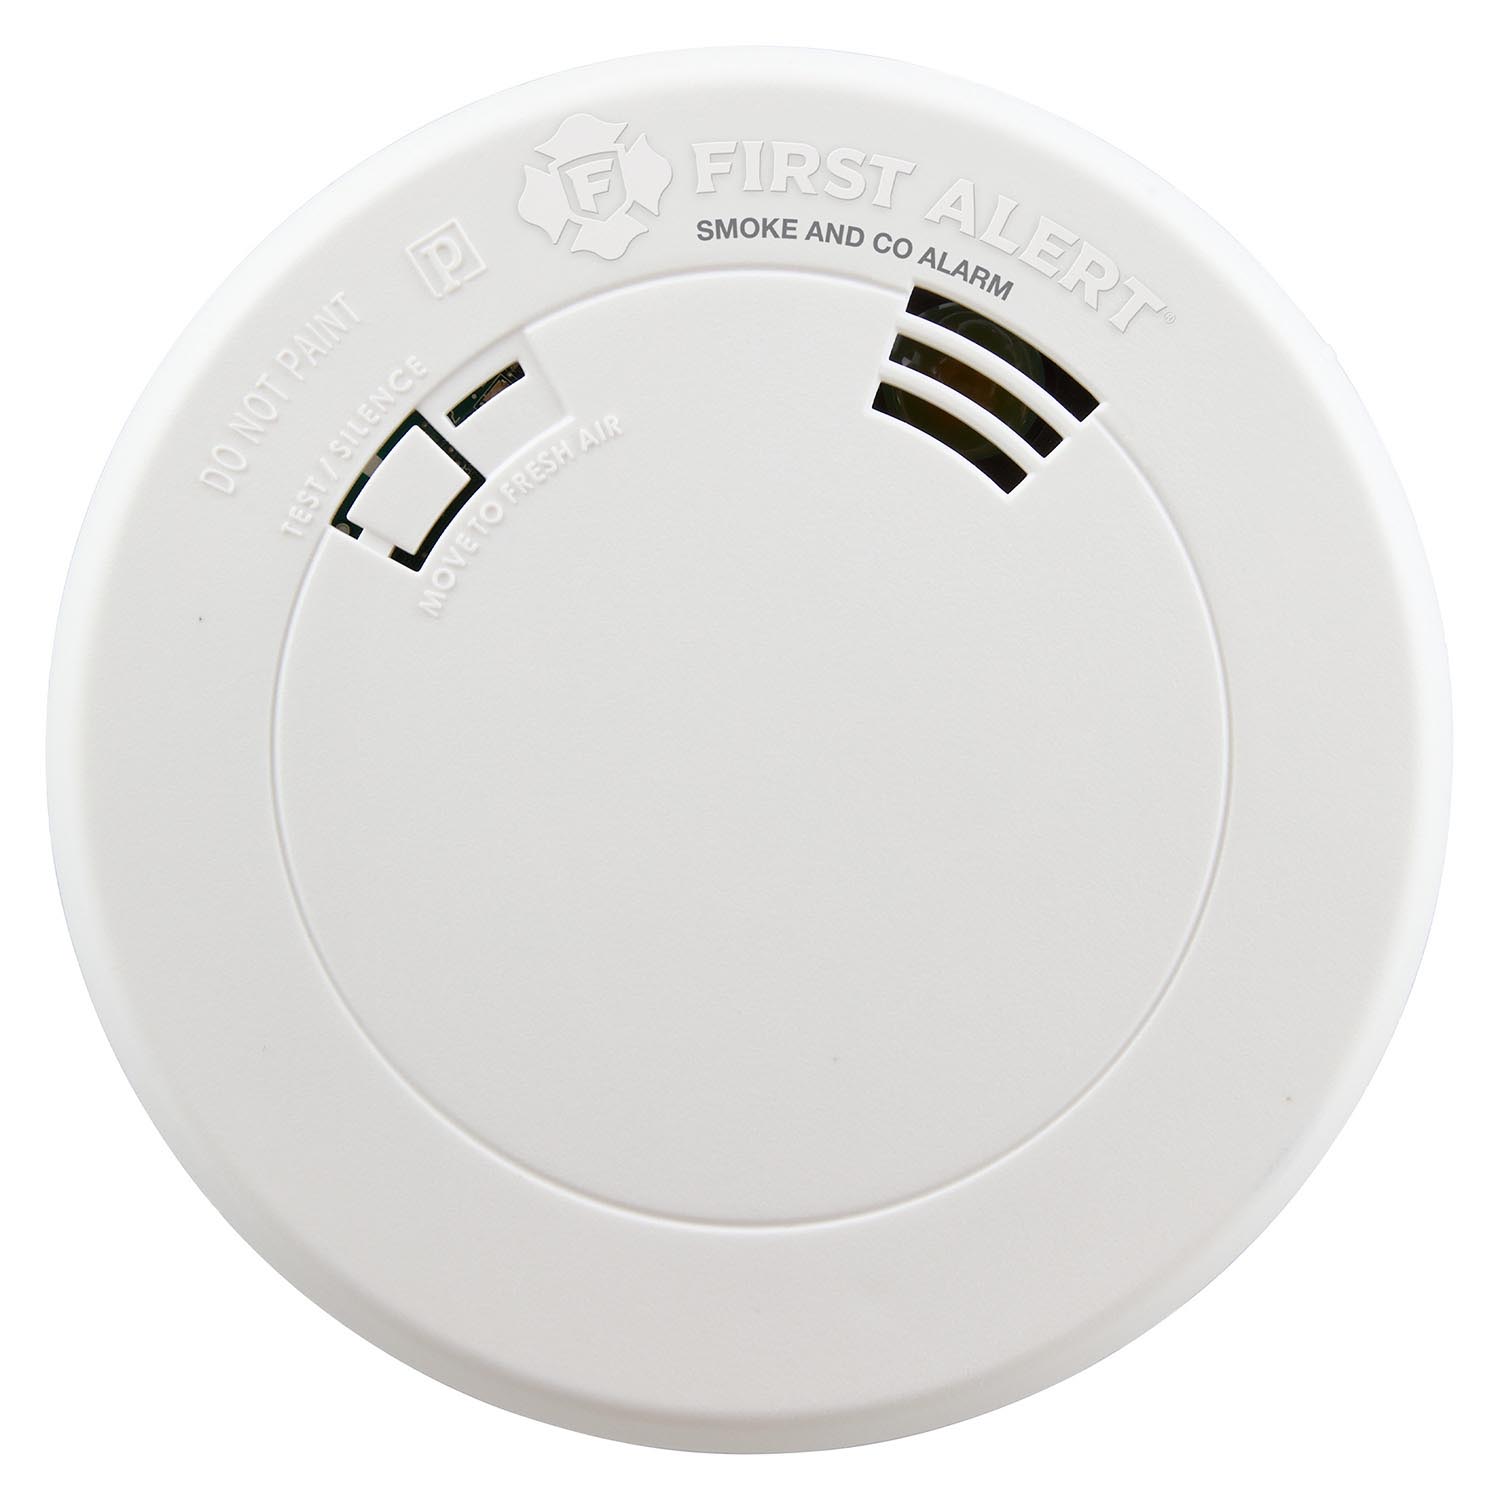 First Alert Compact 10 Year Combo Photoelectric Smoke and Carbon Monoxide Alarm with Voice and Location Feature - PRC710V (1039871)